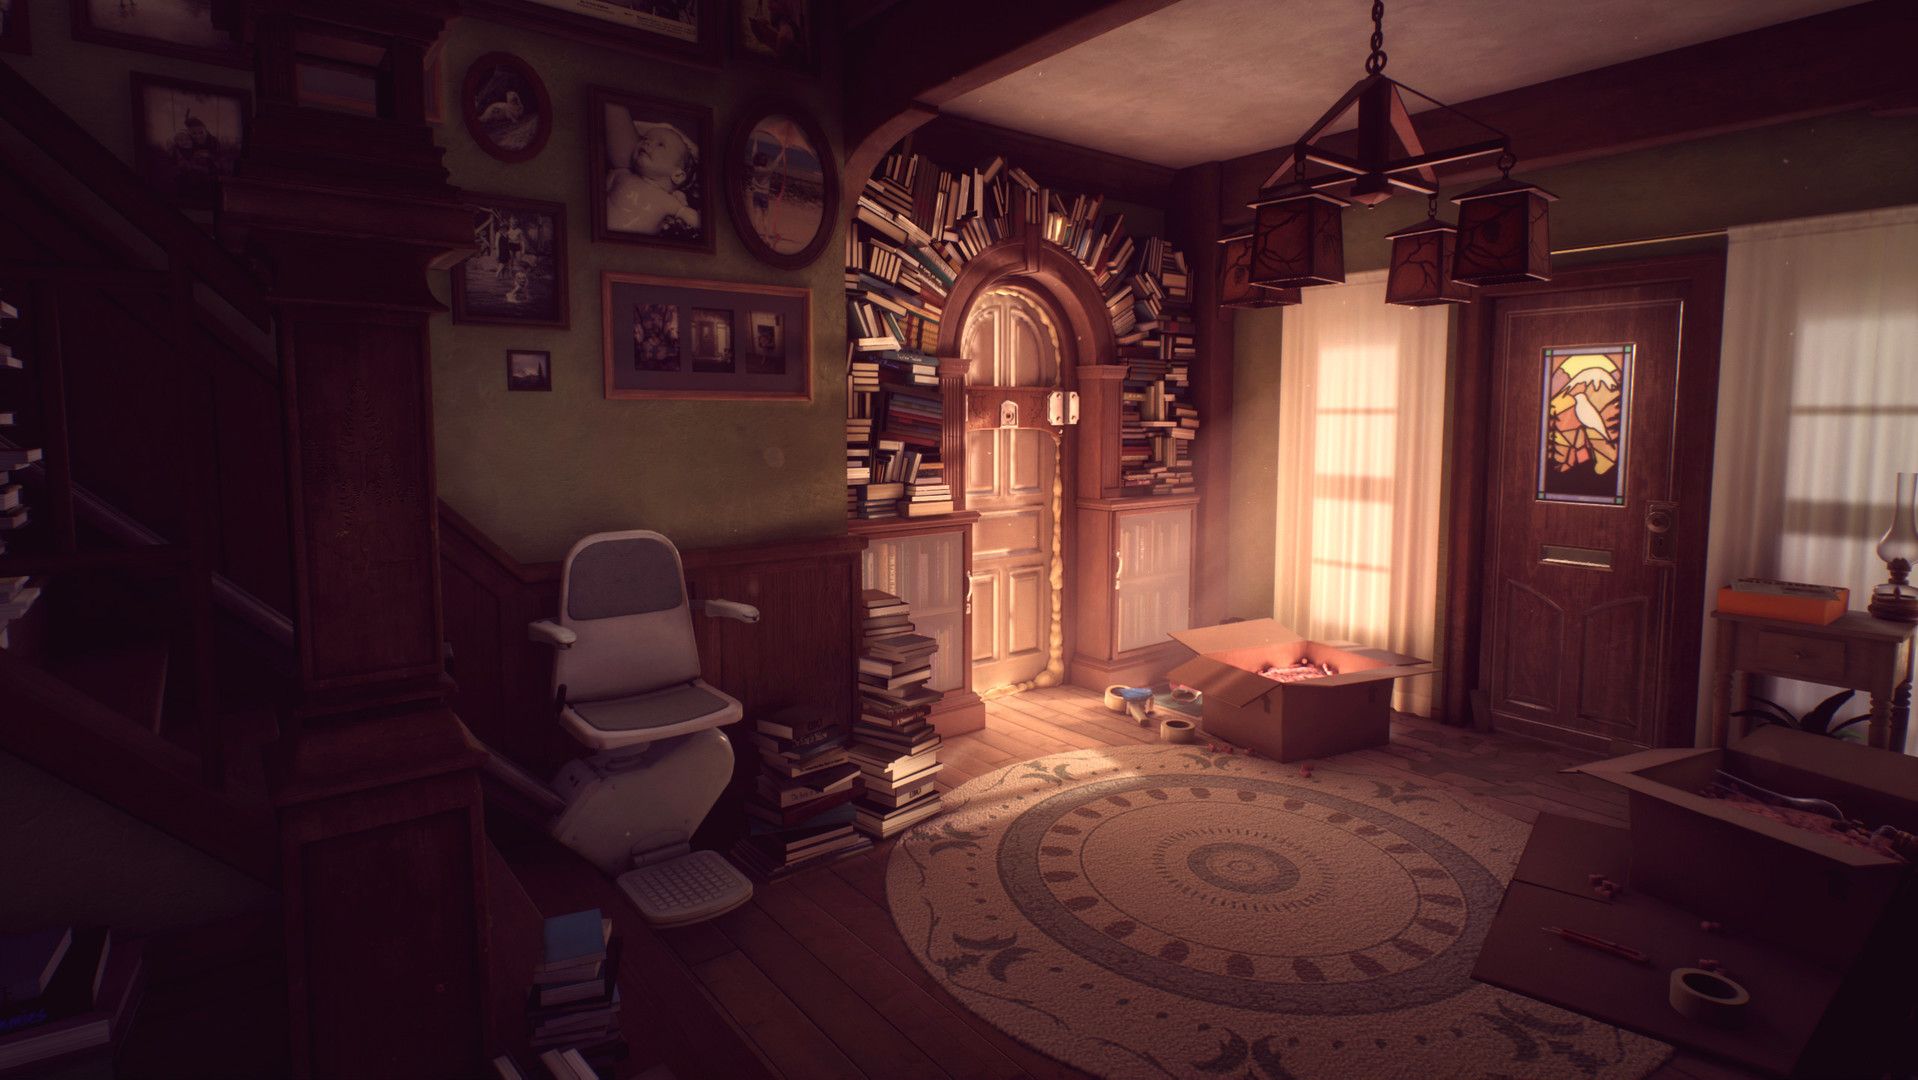 The interior of the house from What Remains of Edith Finch